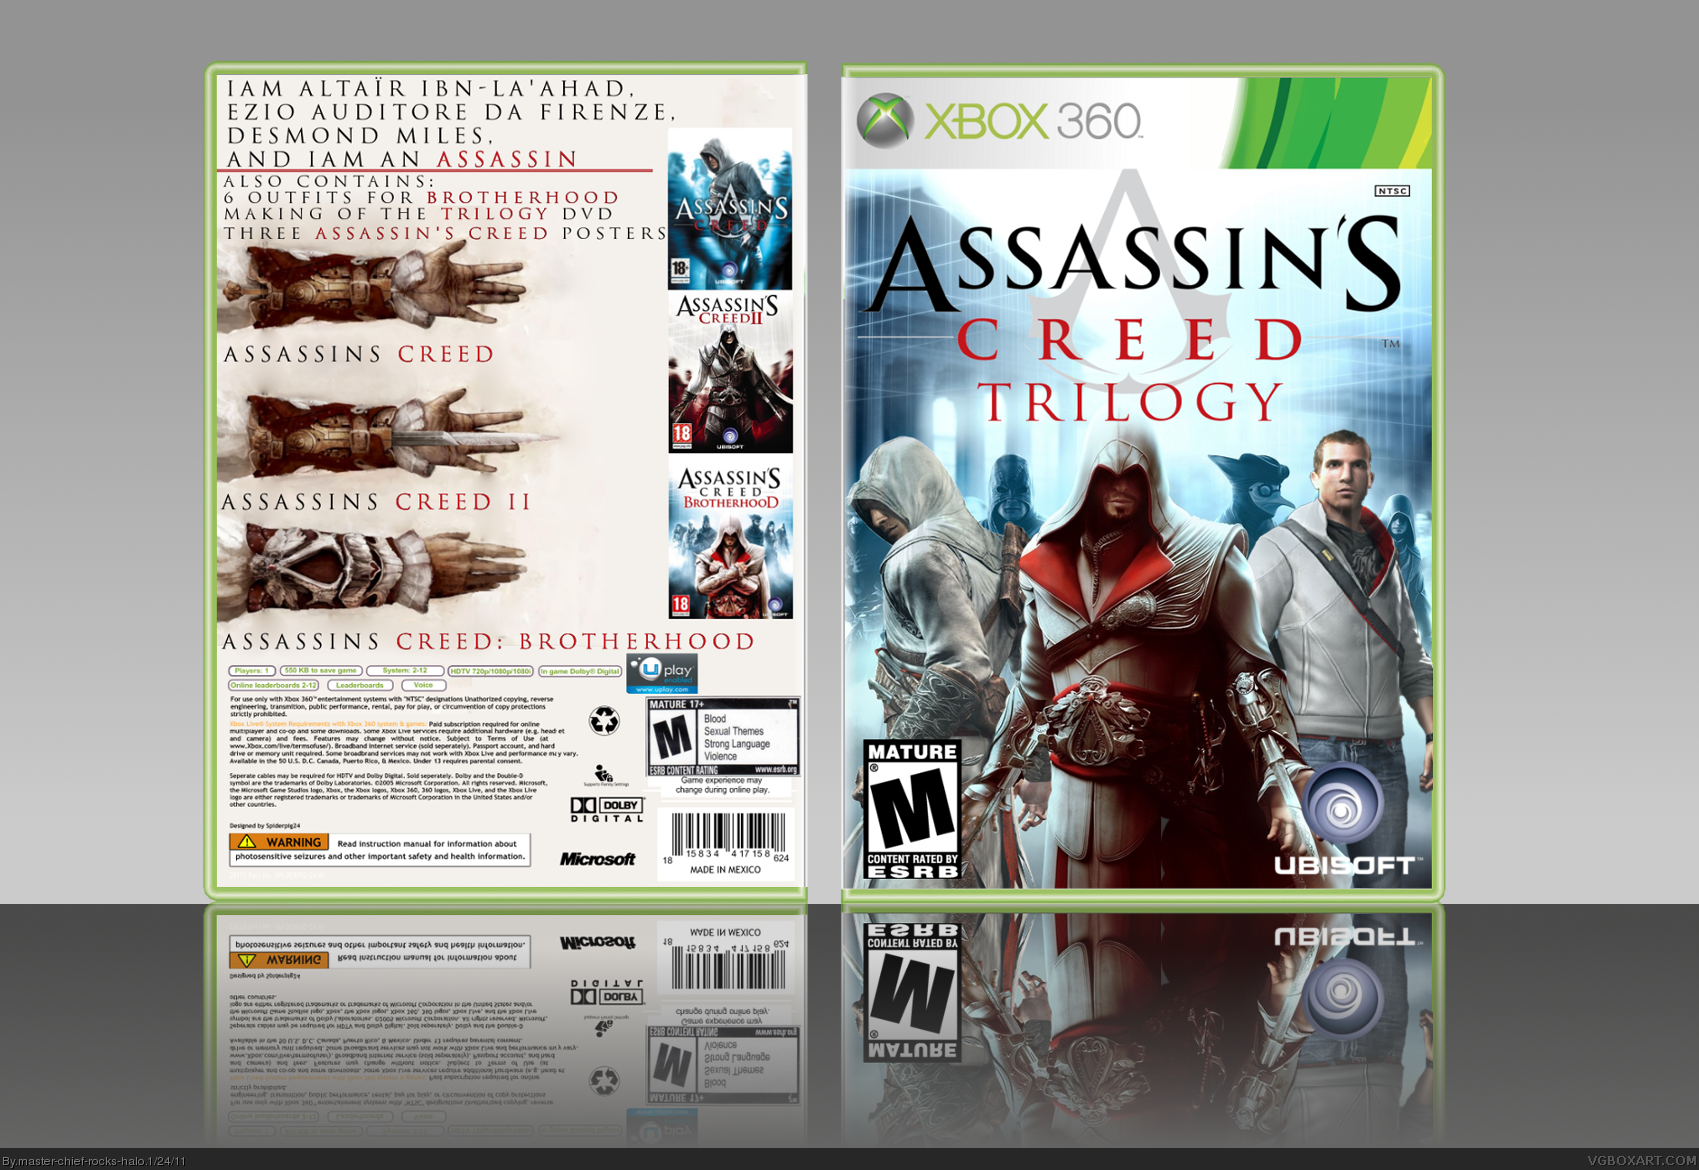 Assassin's Creed Trilogy box cover